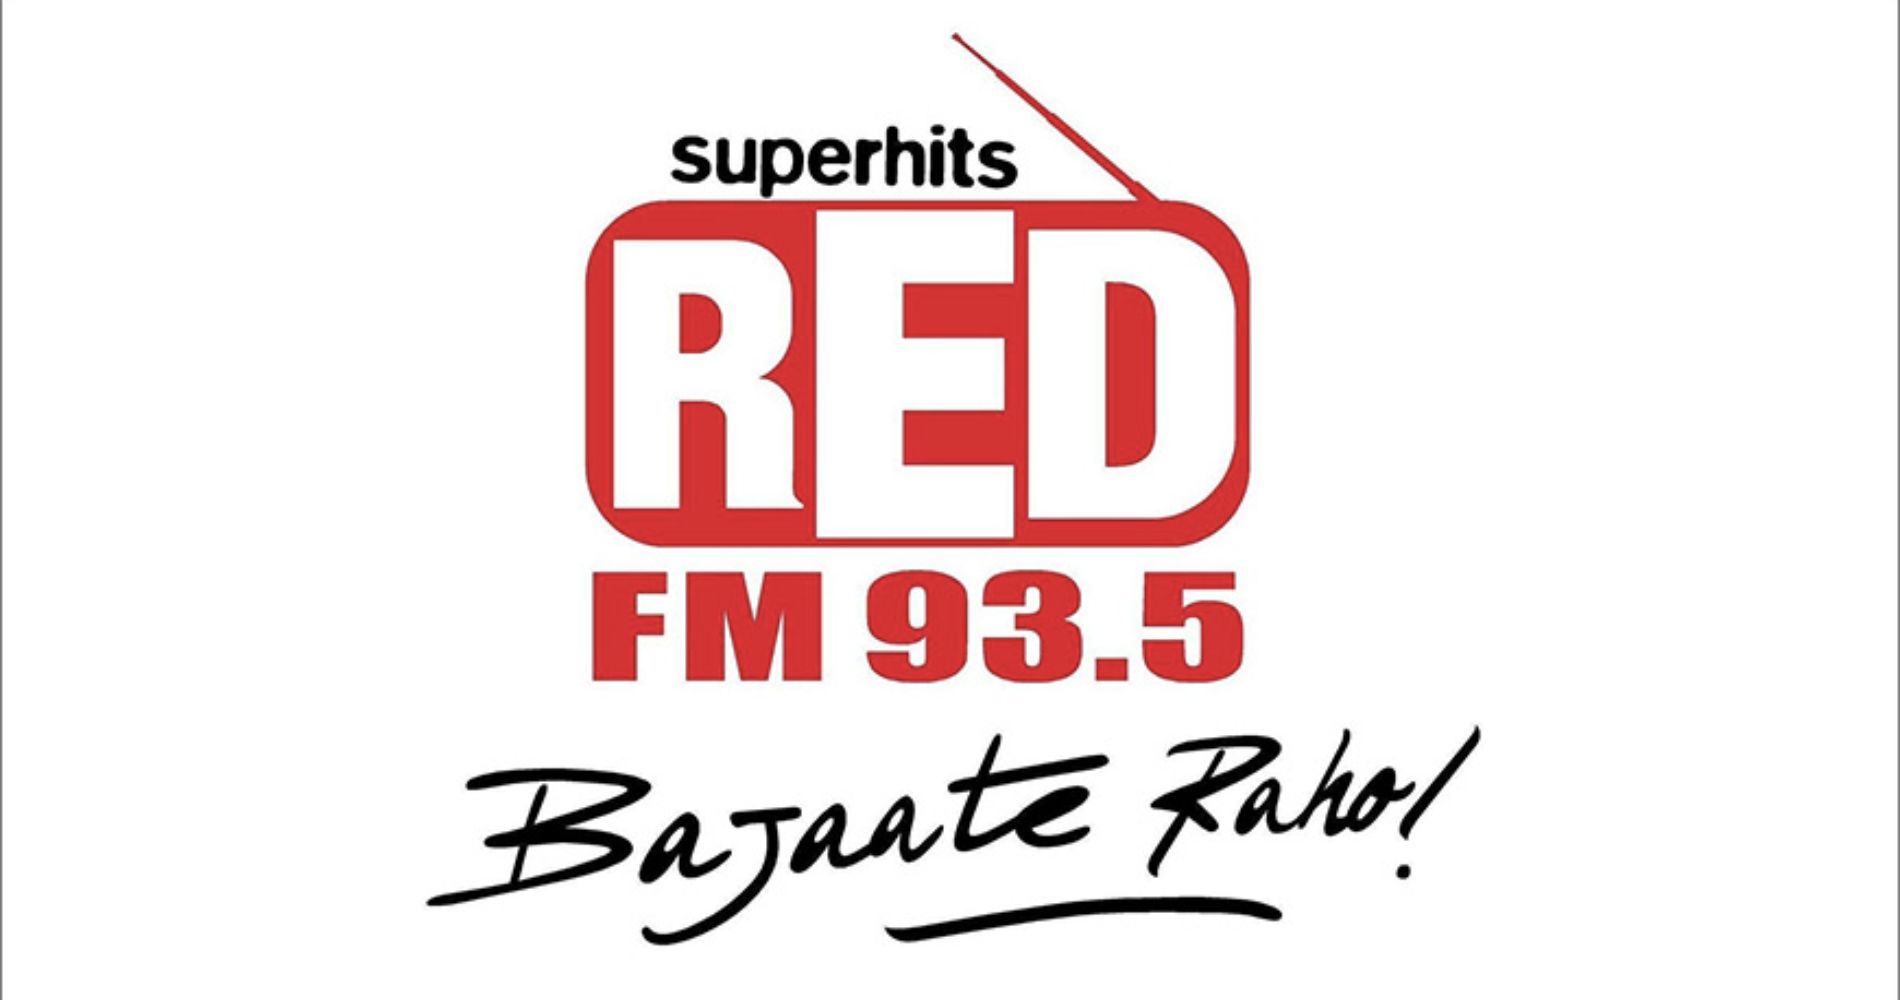 Red FM raises awareness for Traffic Safety with its campaign